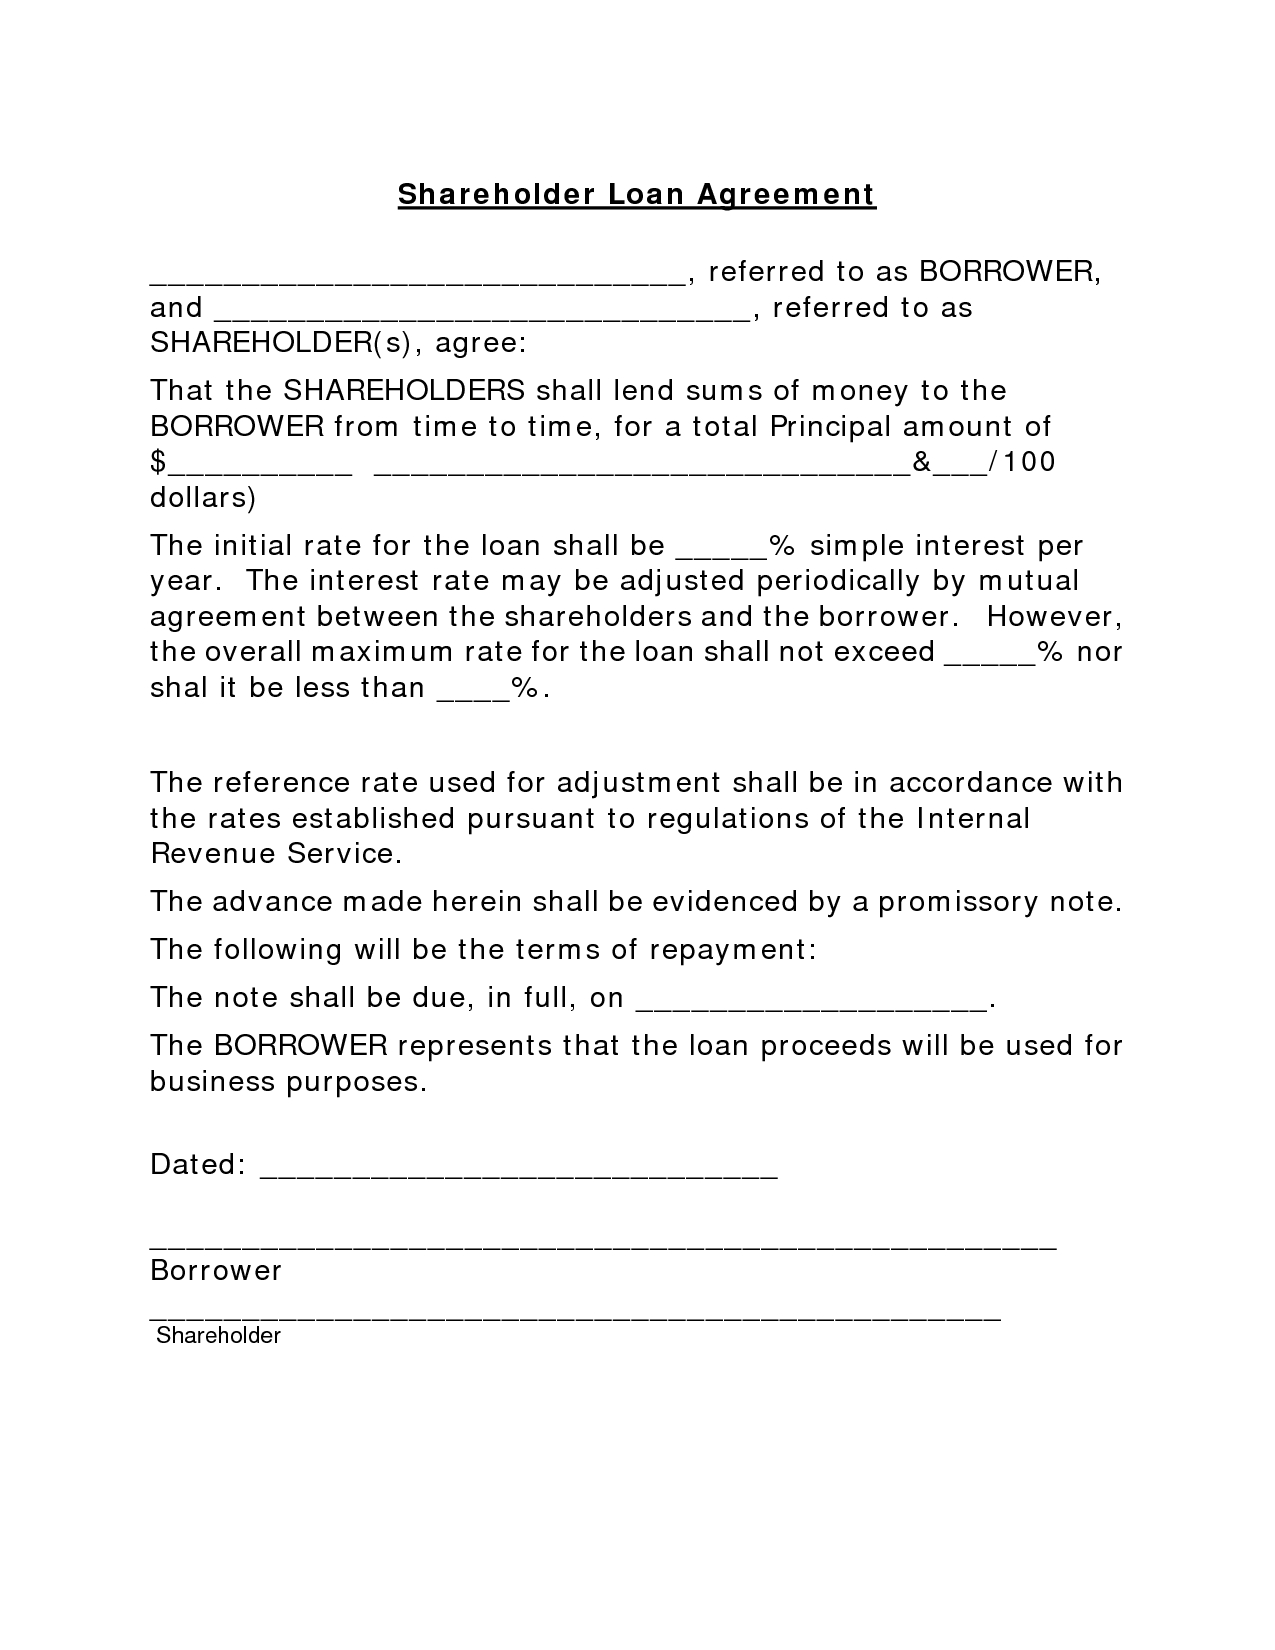 Cash Out Refinance Letter Template - Loan Contracts Template Pt Lawencon Internasional Simple Loan